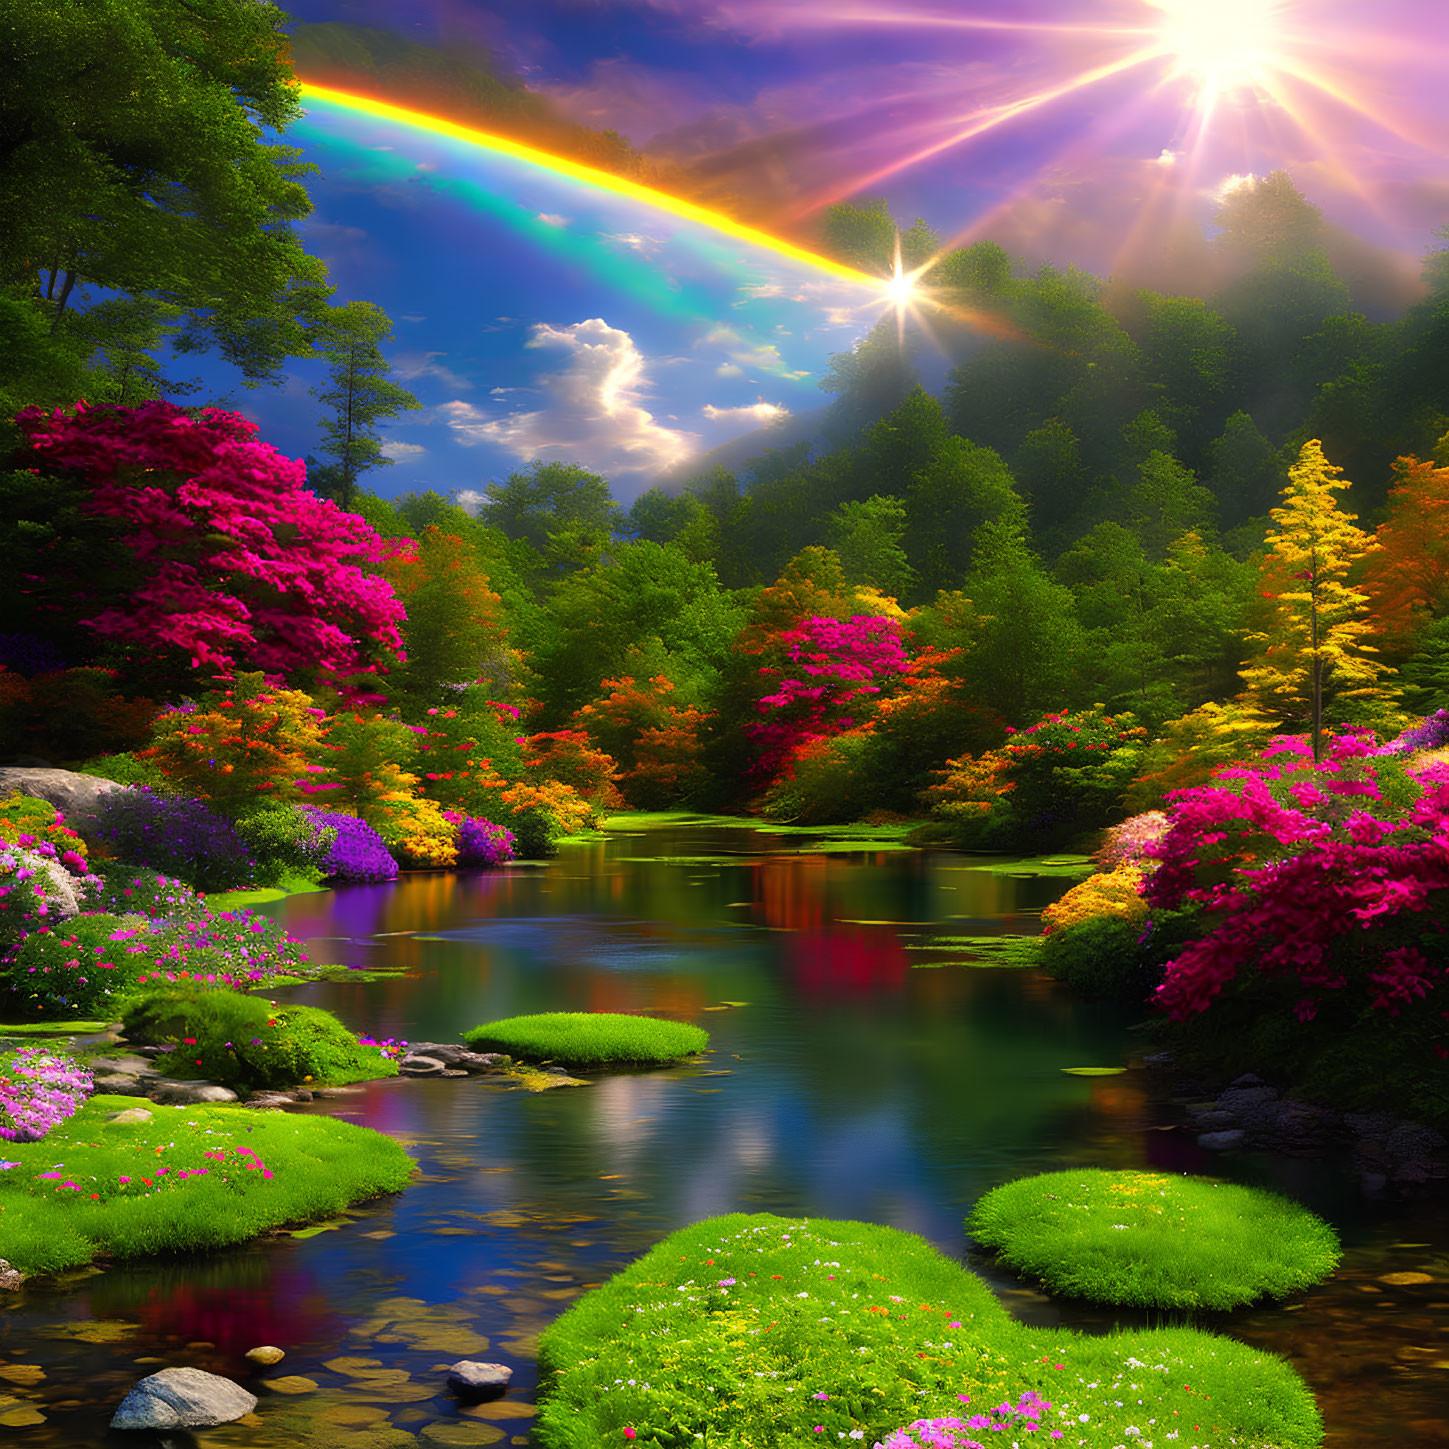 Colorful forest scene with rainbow, sunbeams, river, and lush flora